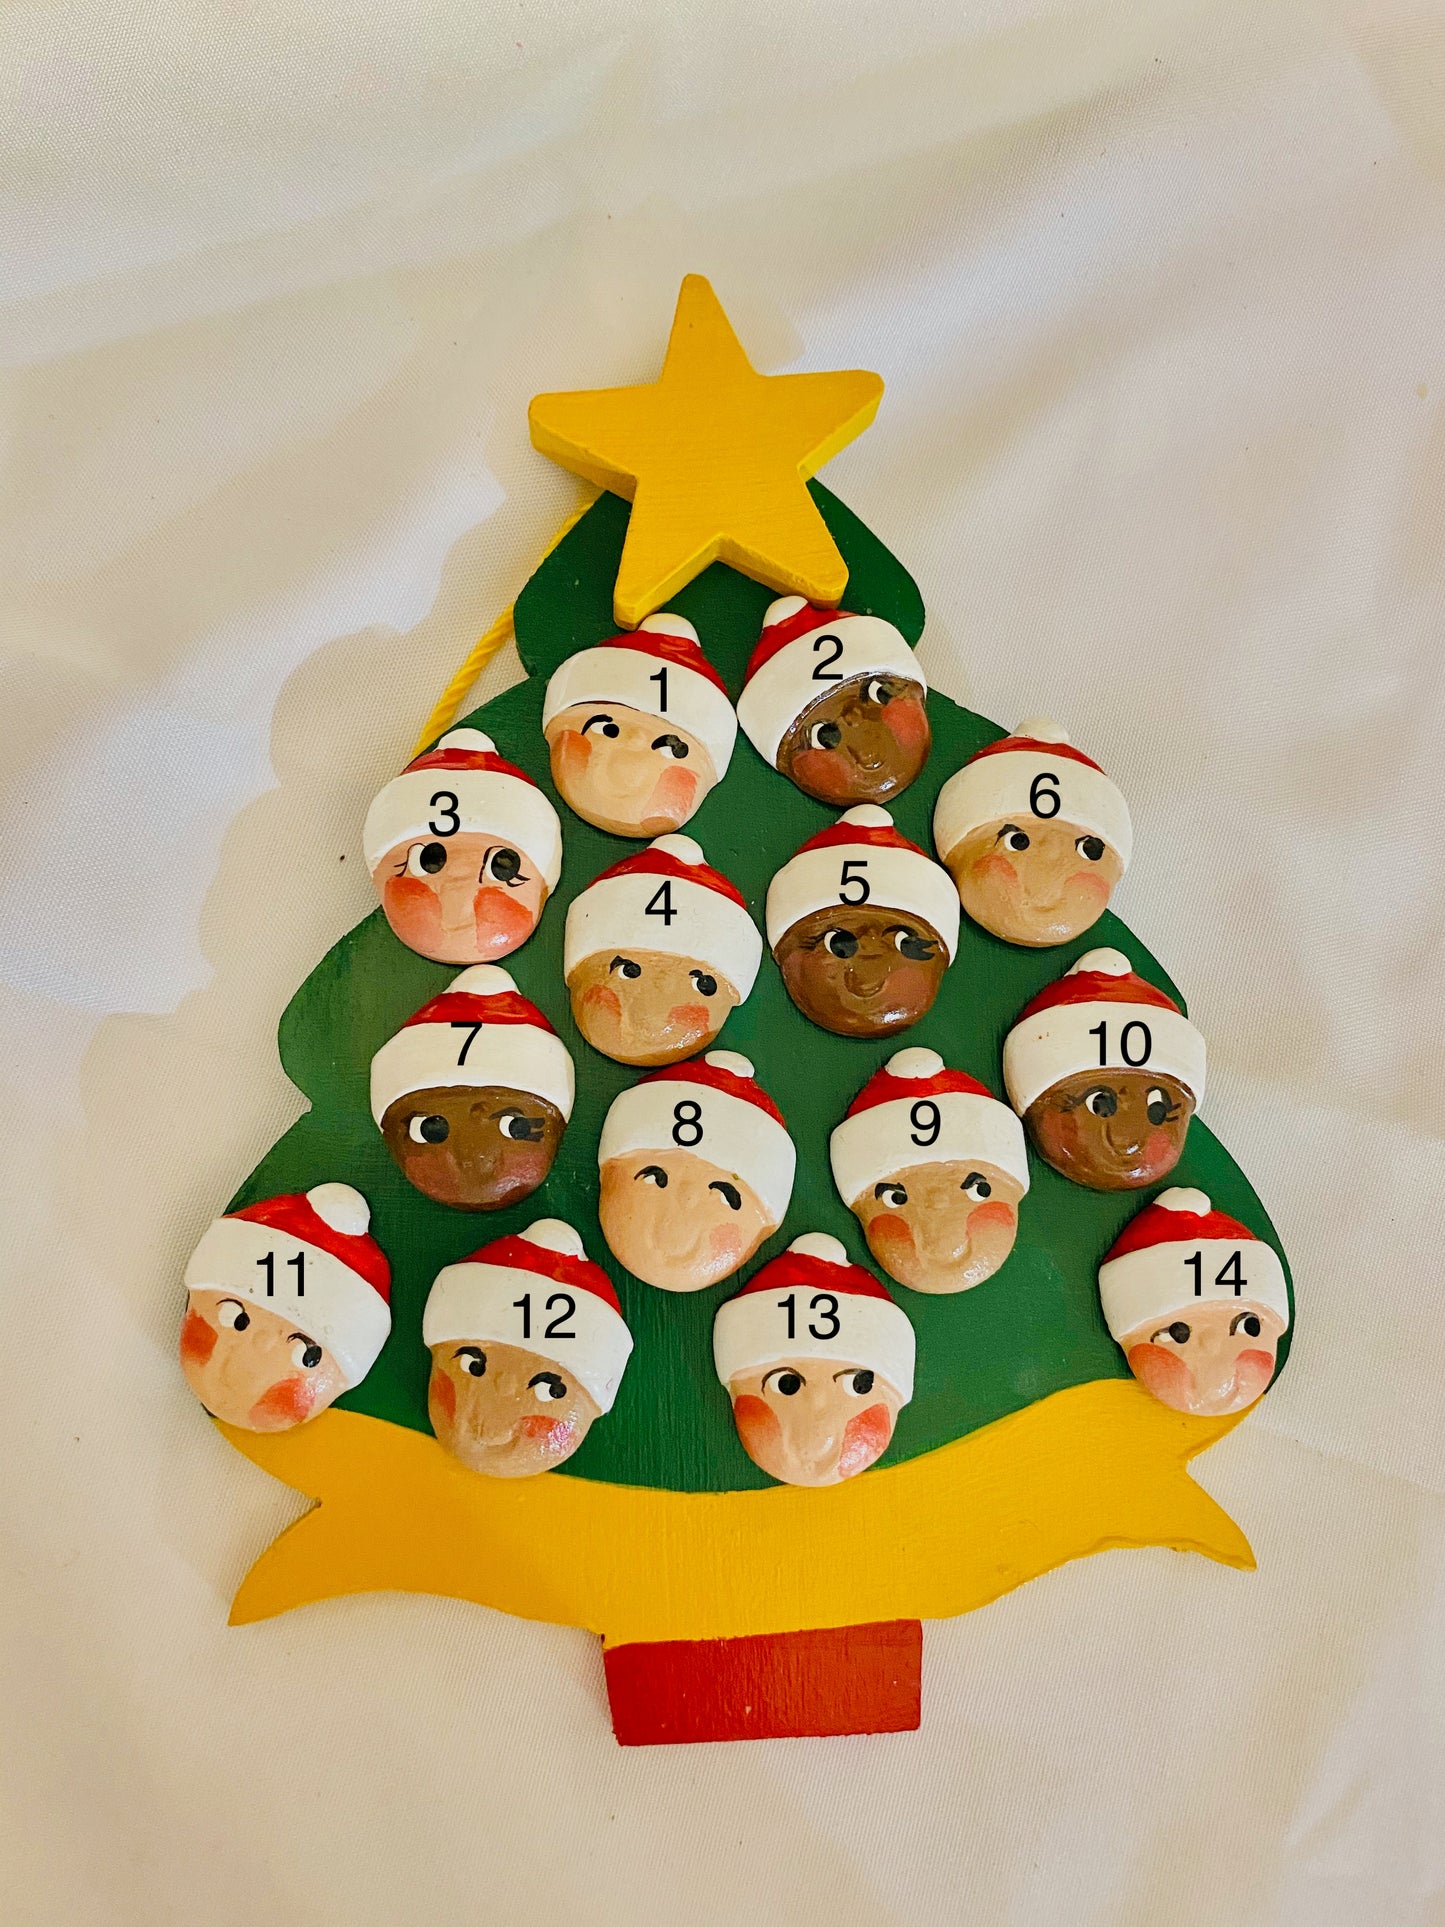 Personalized Ornament 14 Santa Faces on a Christmas Tree  6" x 4.5""